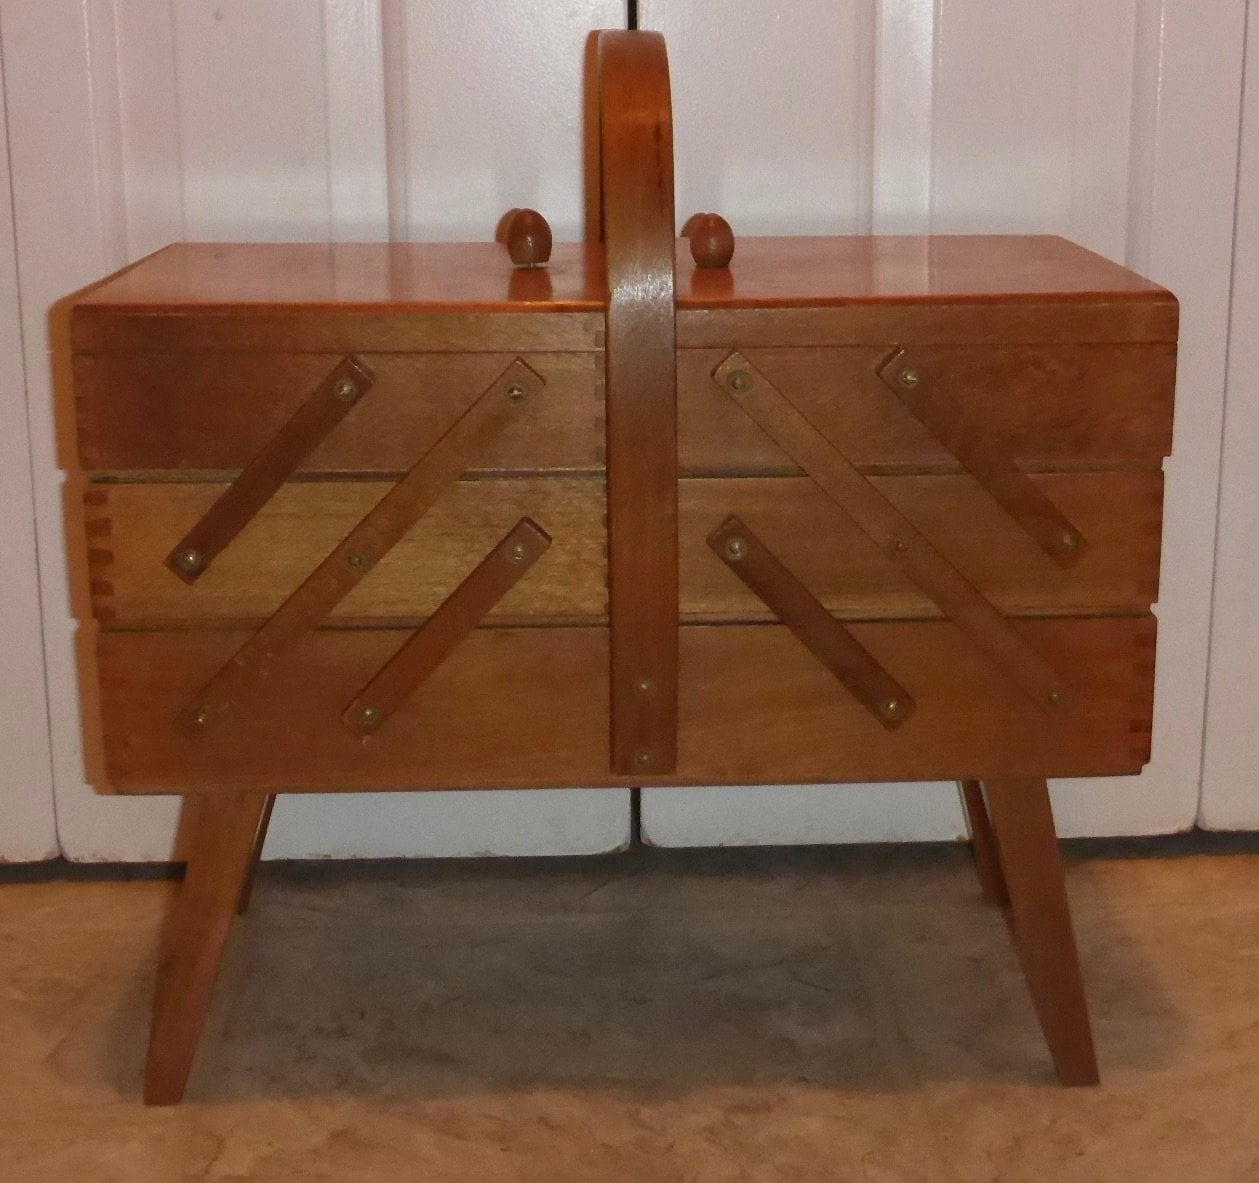 Sold at Auction: Vintage timber sewing box, cantilever style, boomerang  shaped legs, clean example.